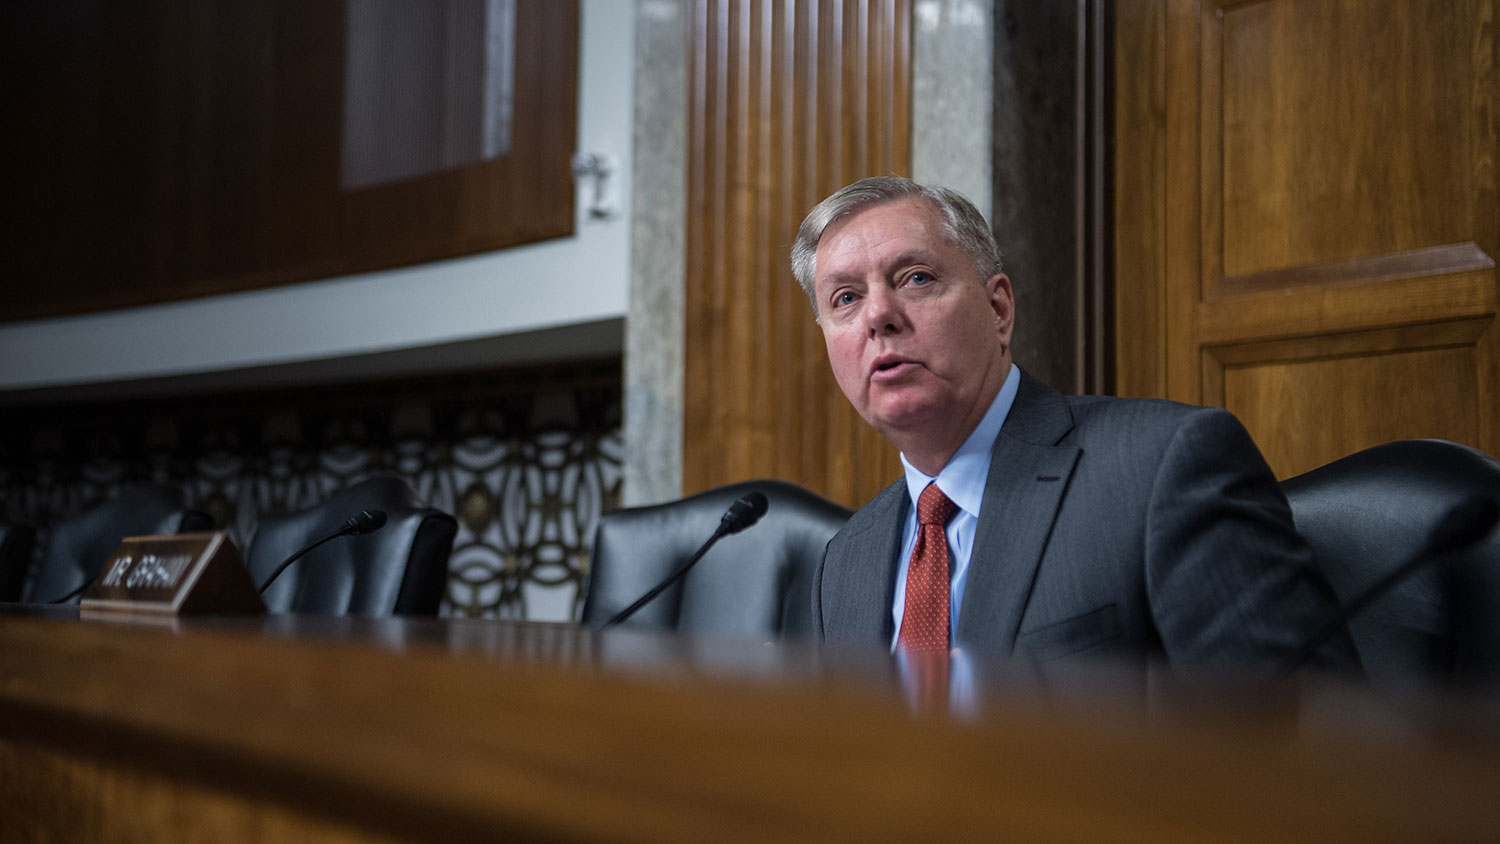 US Republican Senator from South Carolina Lindsey Graham speaks during a US Senate Armed Services Committee on global challenges and US national security strategy on Capitol Hill in Washington&lt;DC on January 27, 2015.
